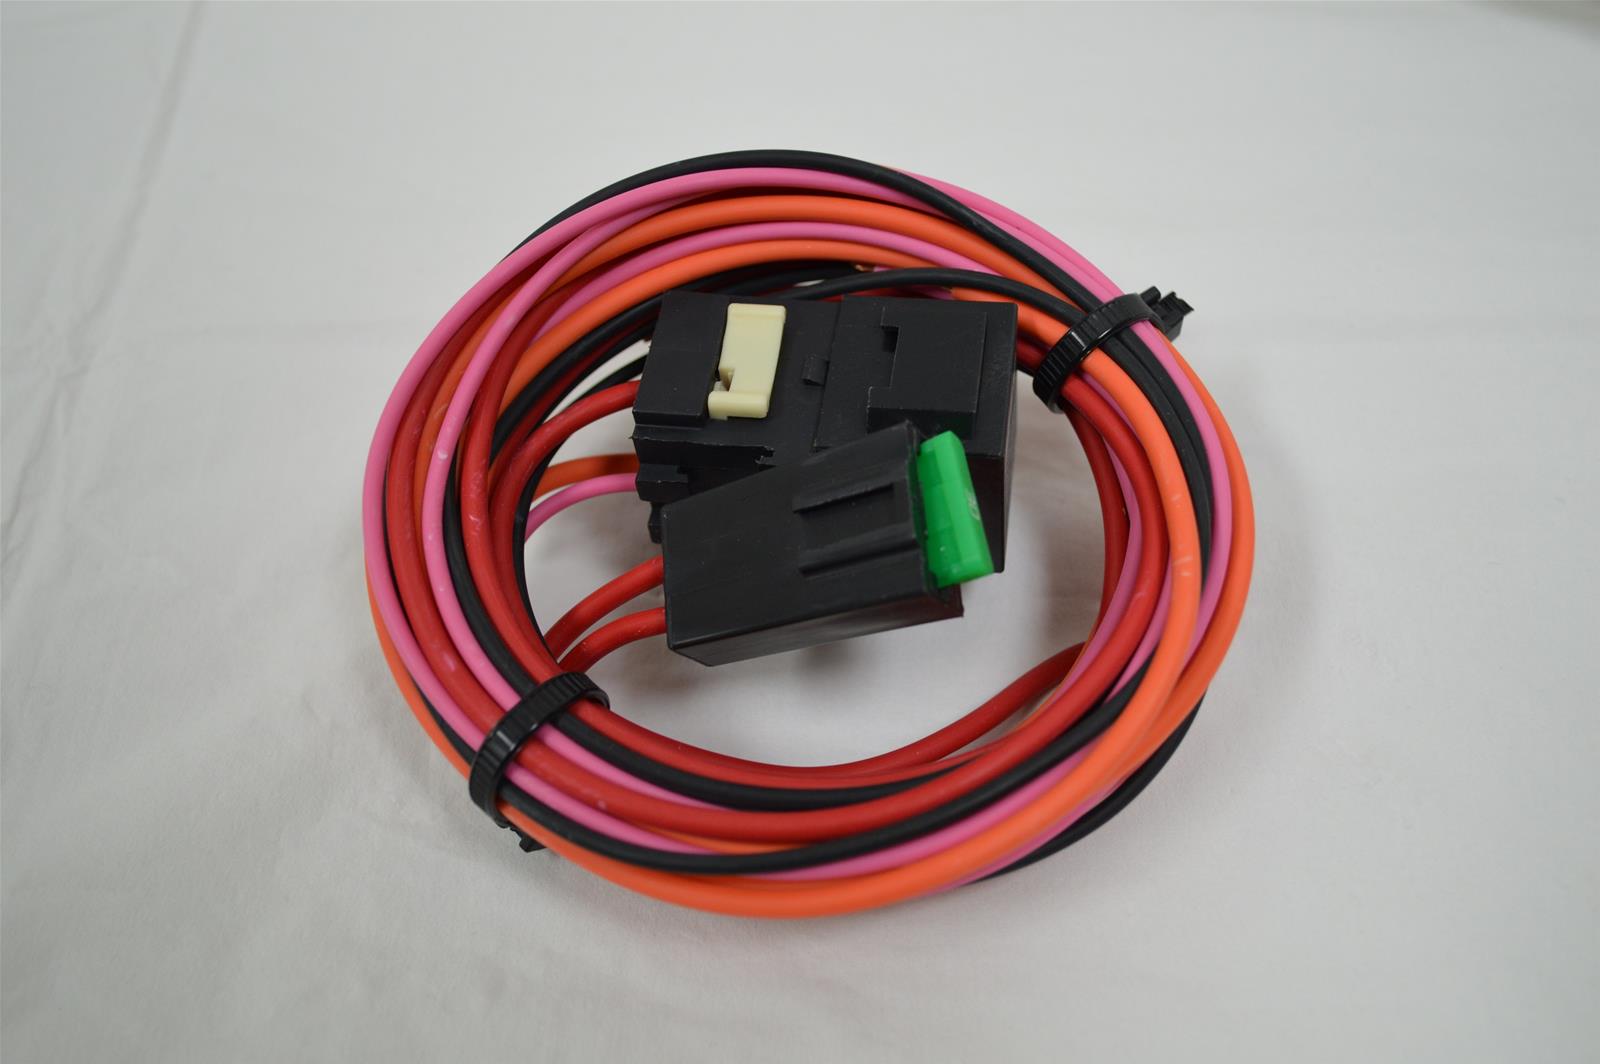 Wiring harnesses and components